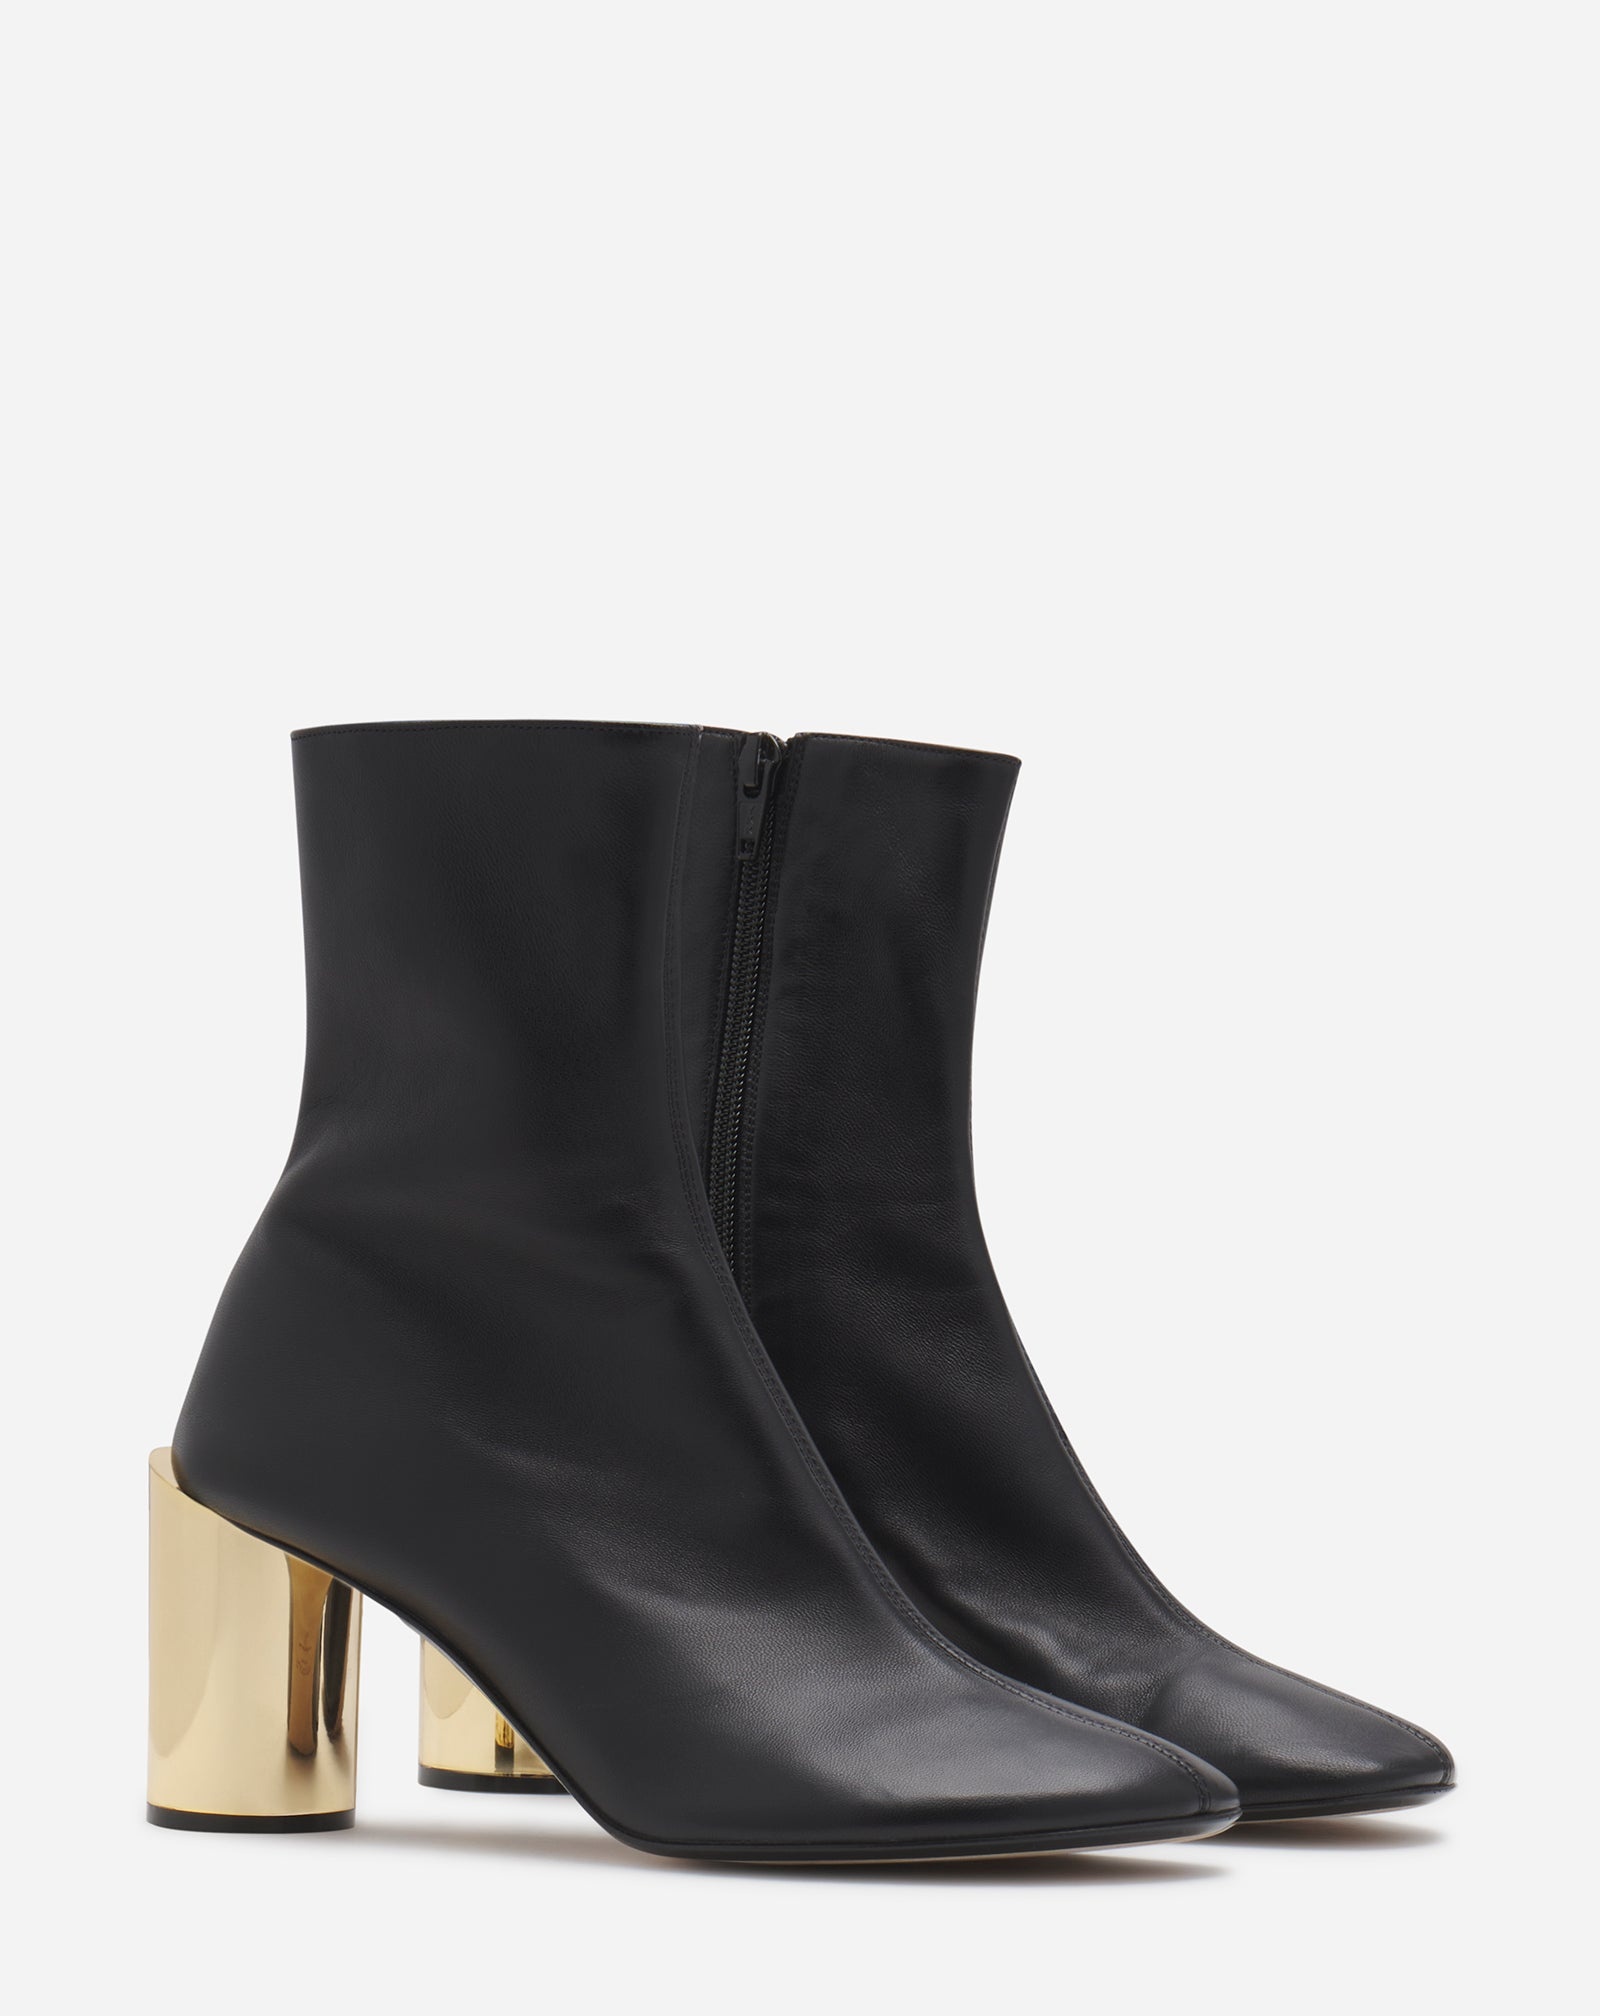 LEATHER SEQUENCE BY LANVIN CHUNKY HEELED BOOTS - 2